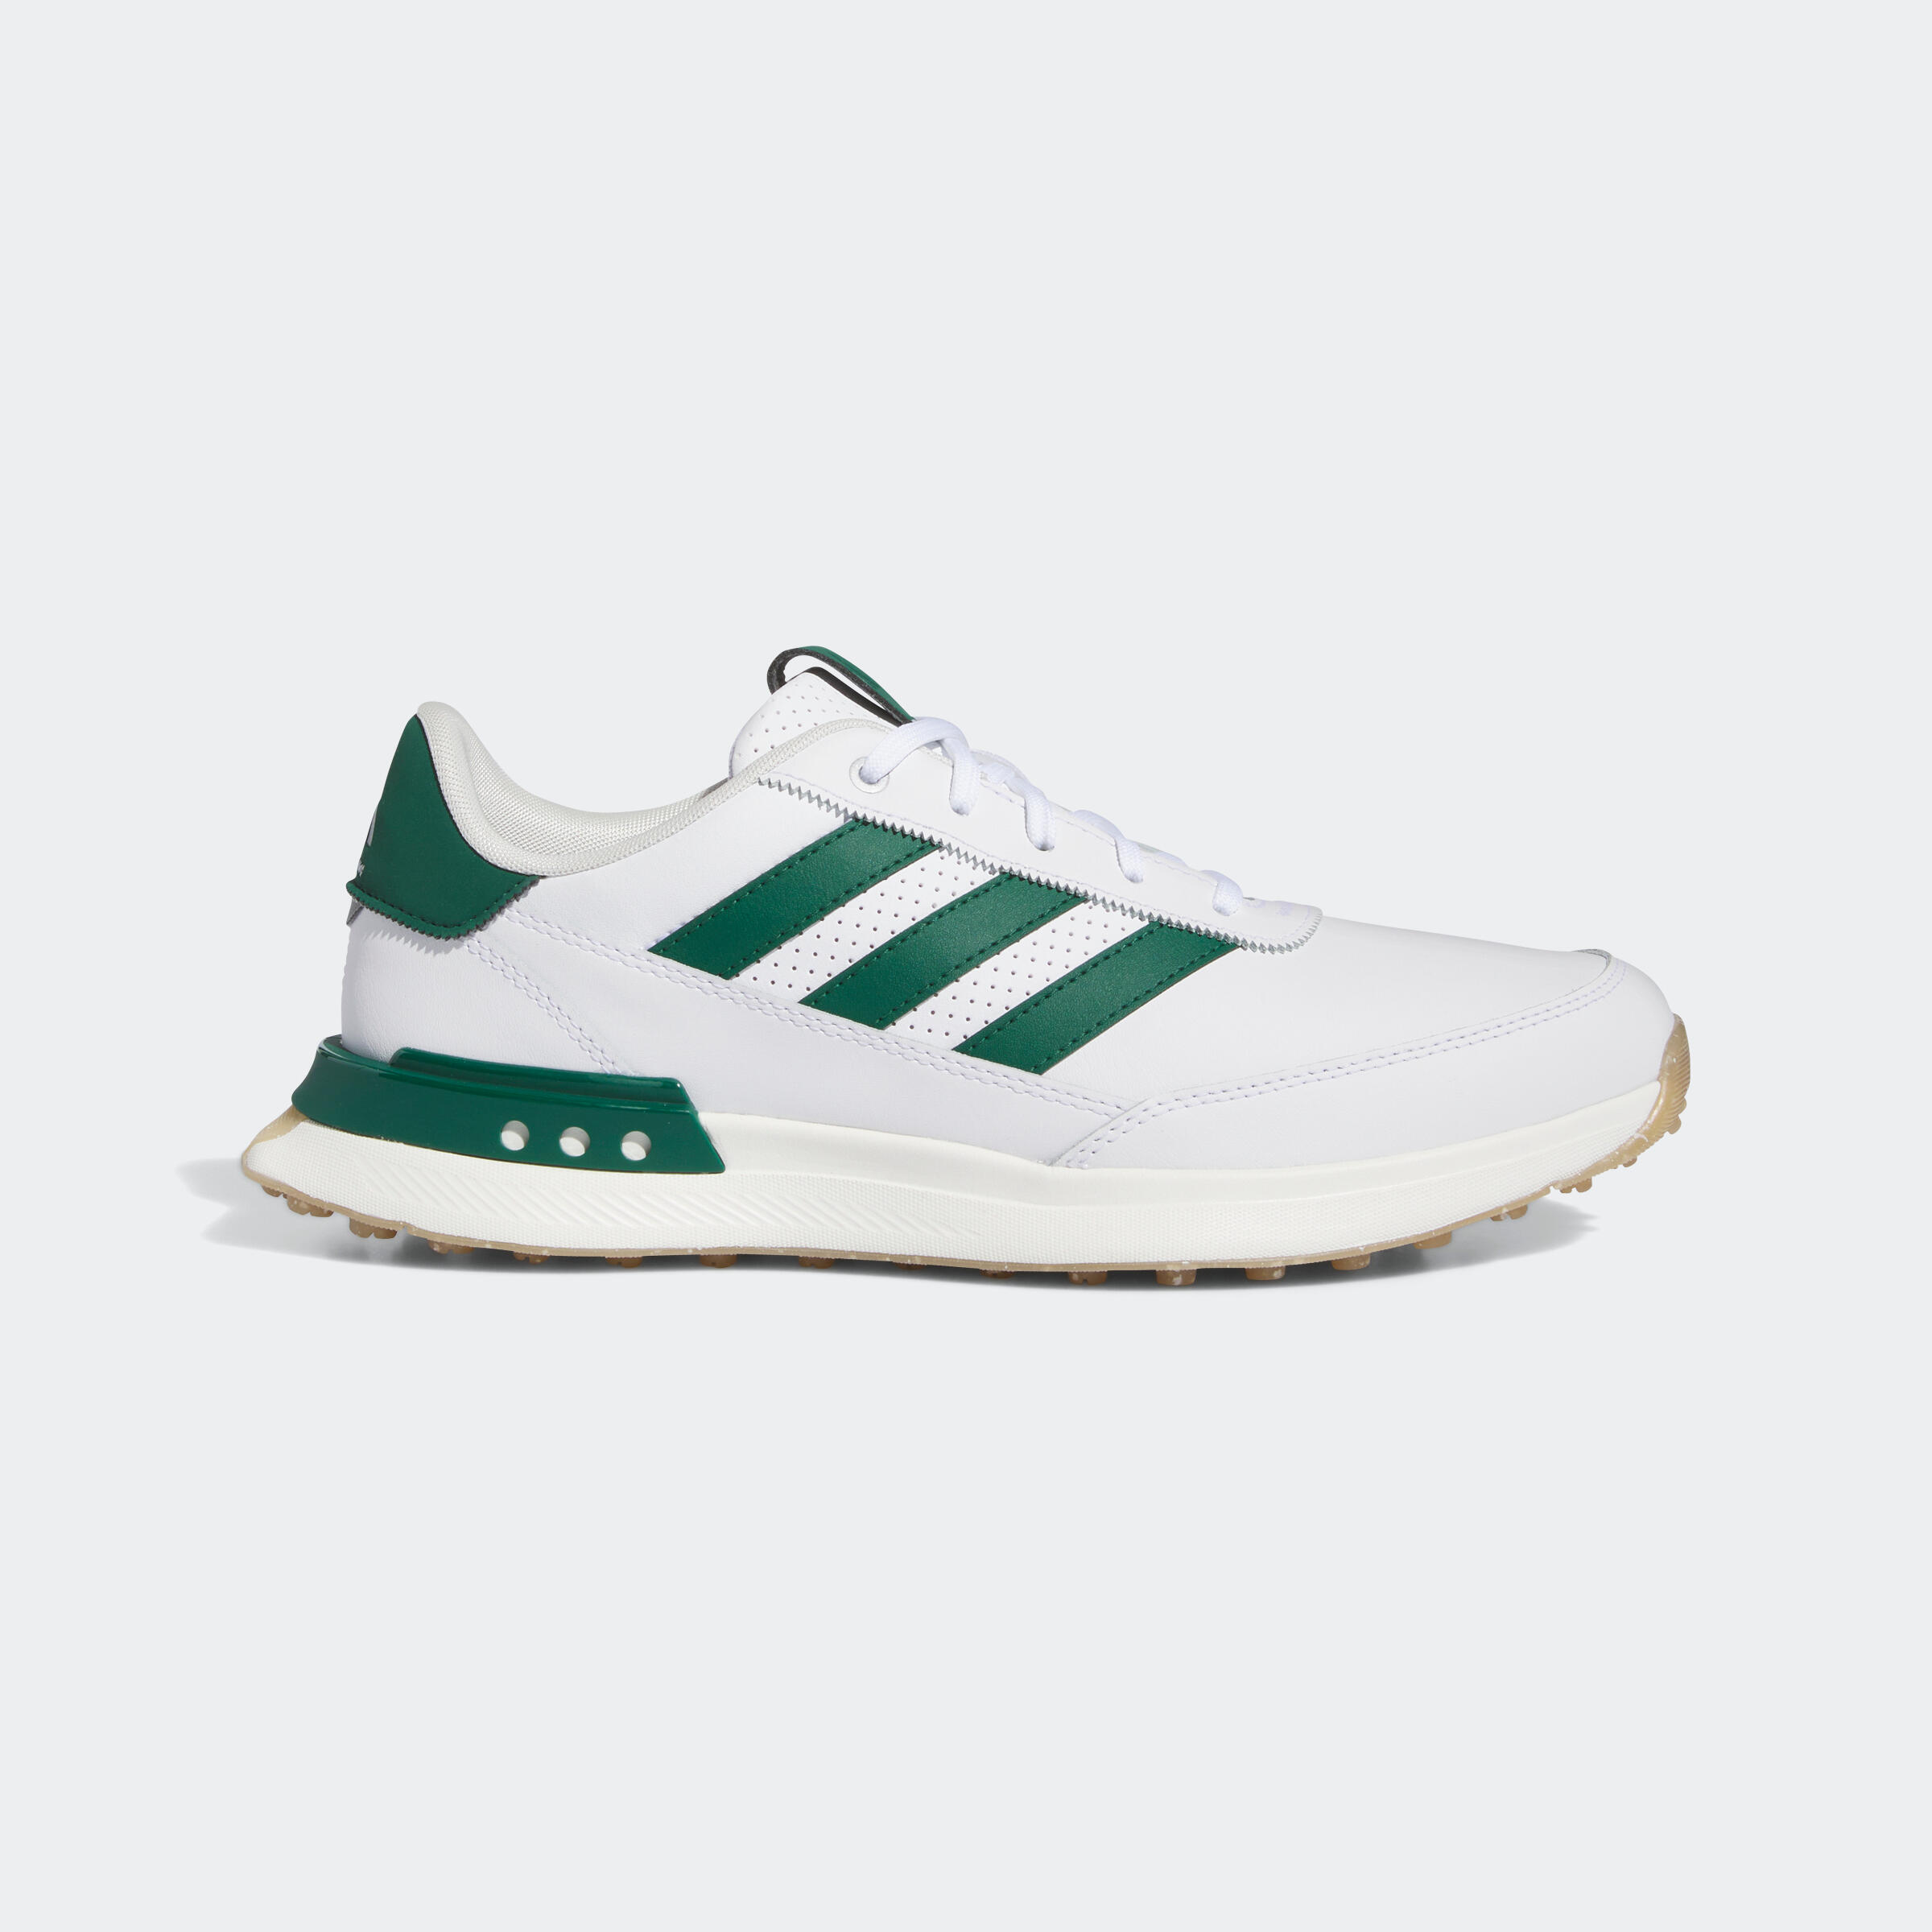 ADIDAS Men's golf shoes ADIDAS S2G waterproof - white and green